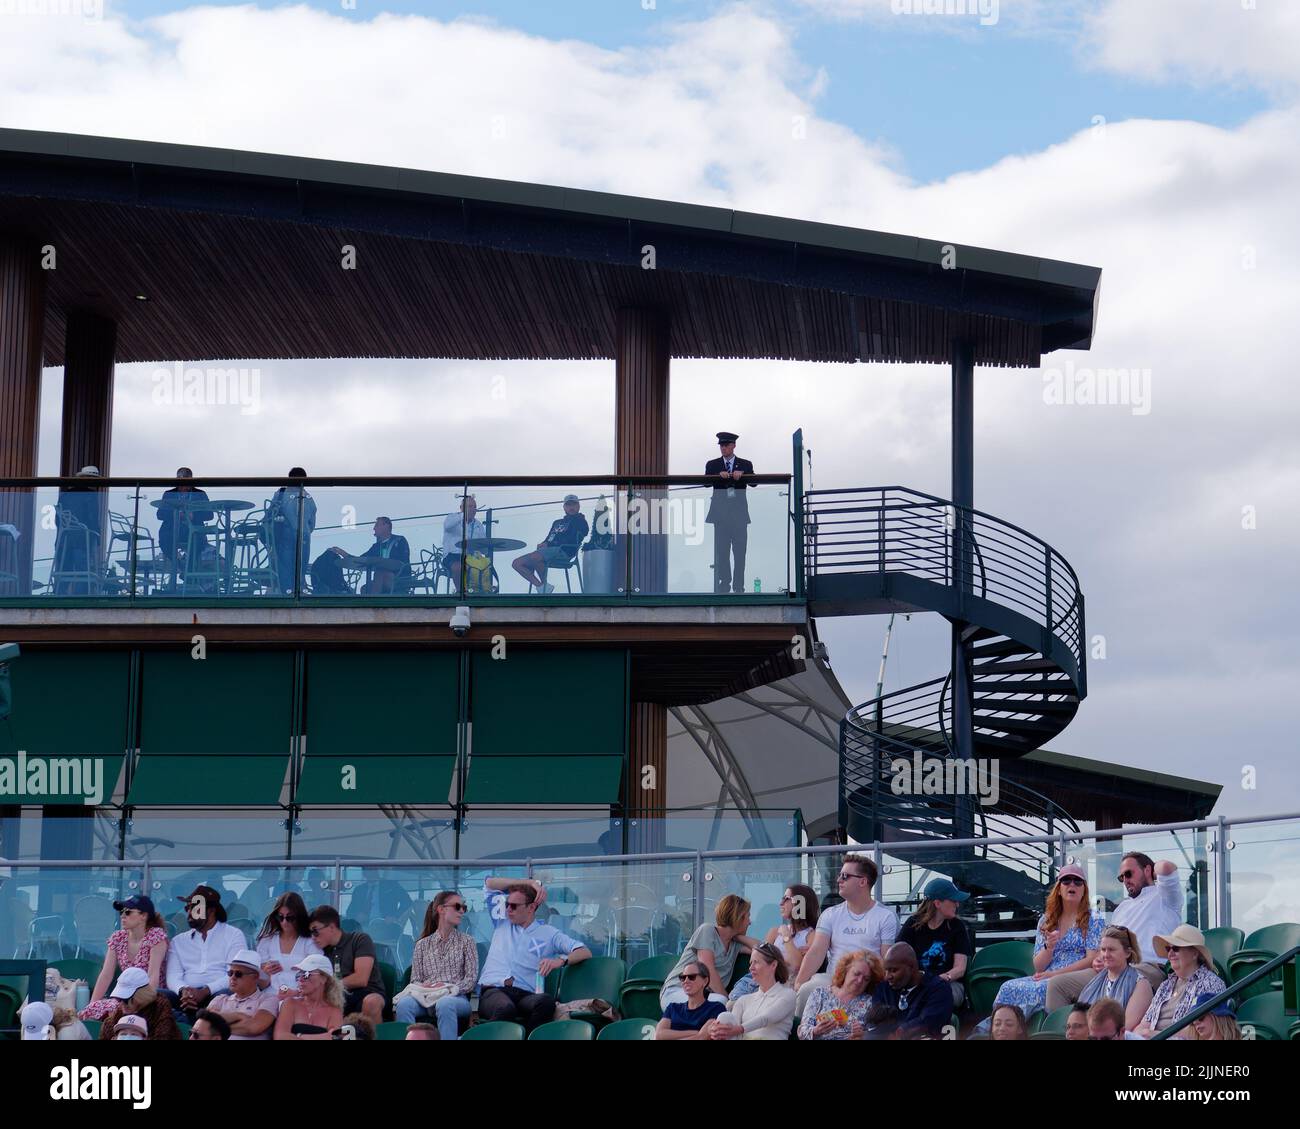 Wimbledon, Greater London, England, July 02 2022: Wimbledon Tennis Championship. Part of the grandstand area of court three. Stock Photo